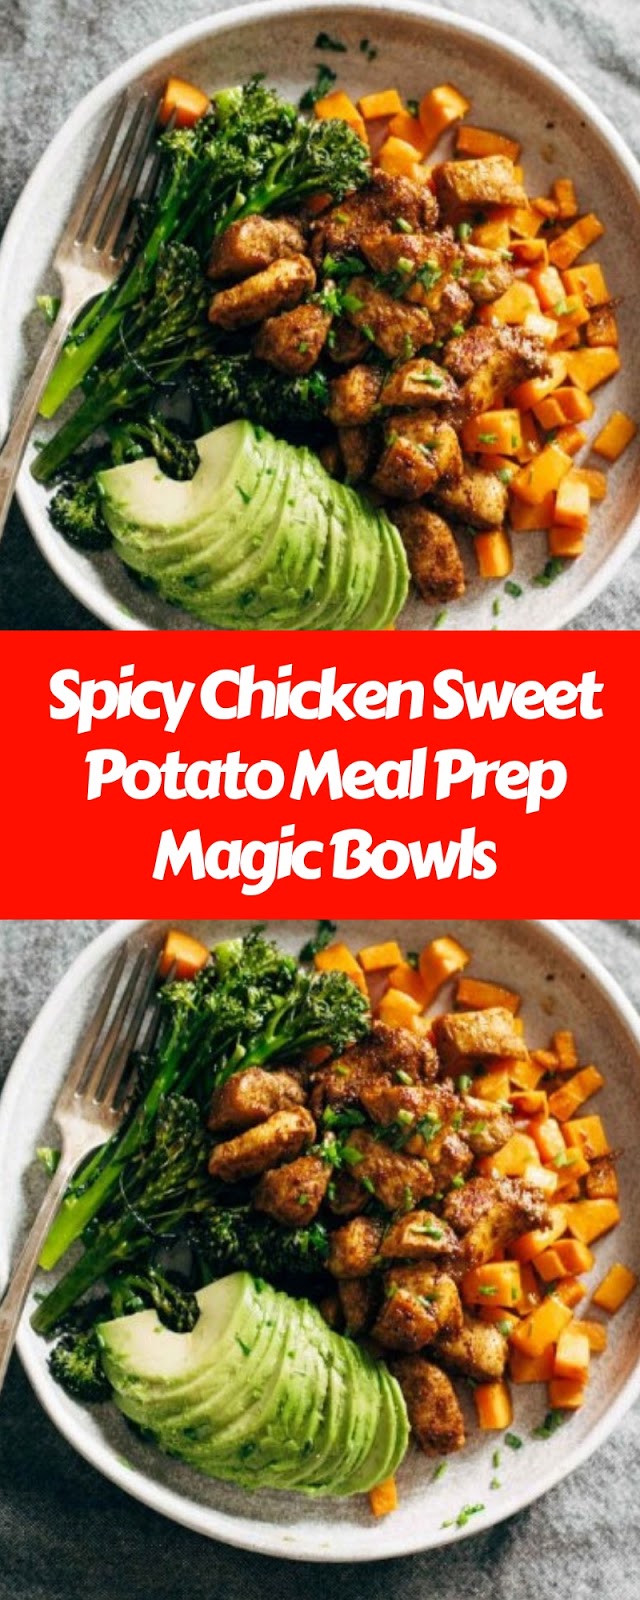 Spicy Chicken Sweet Potato Meal Prep Magic Bowls